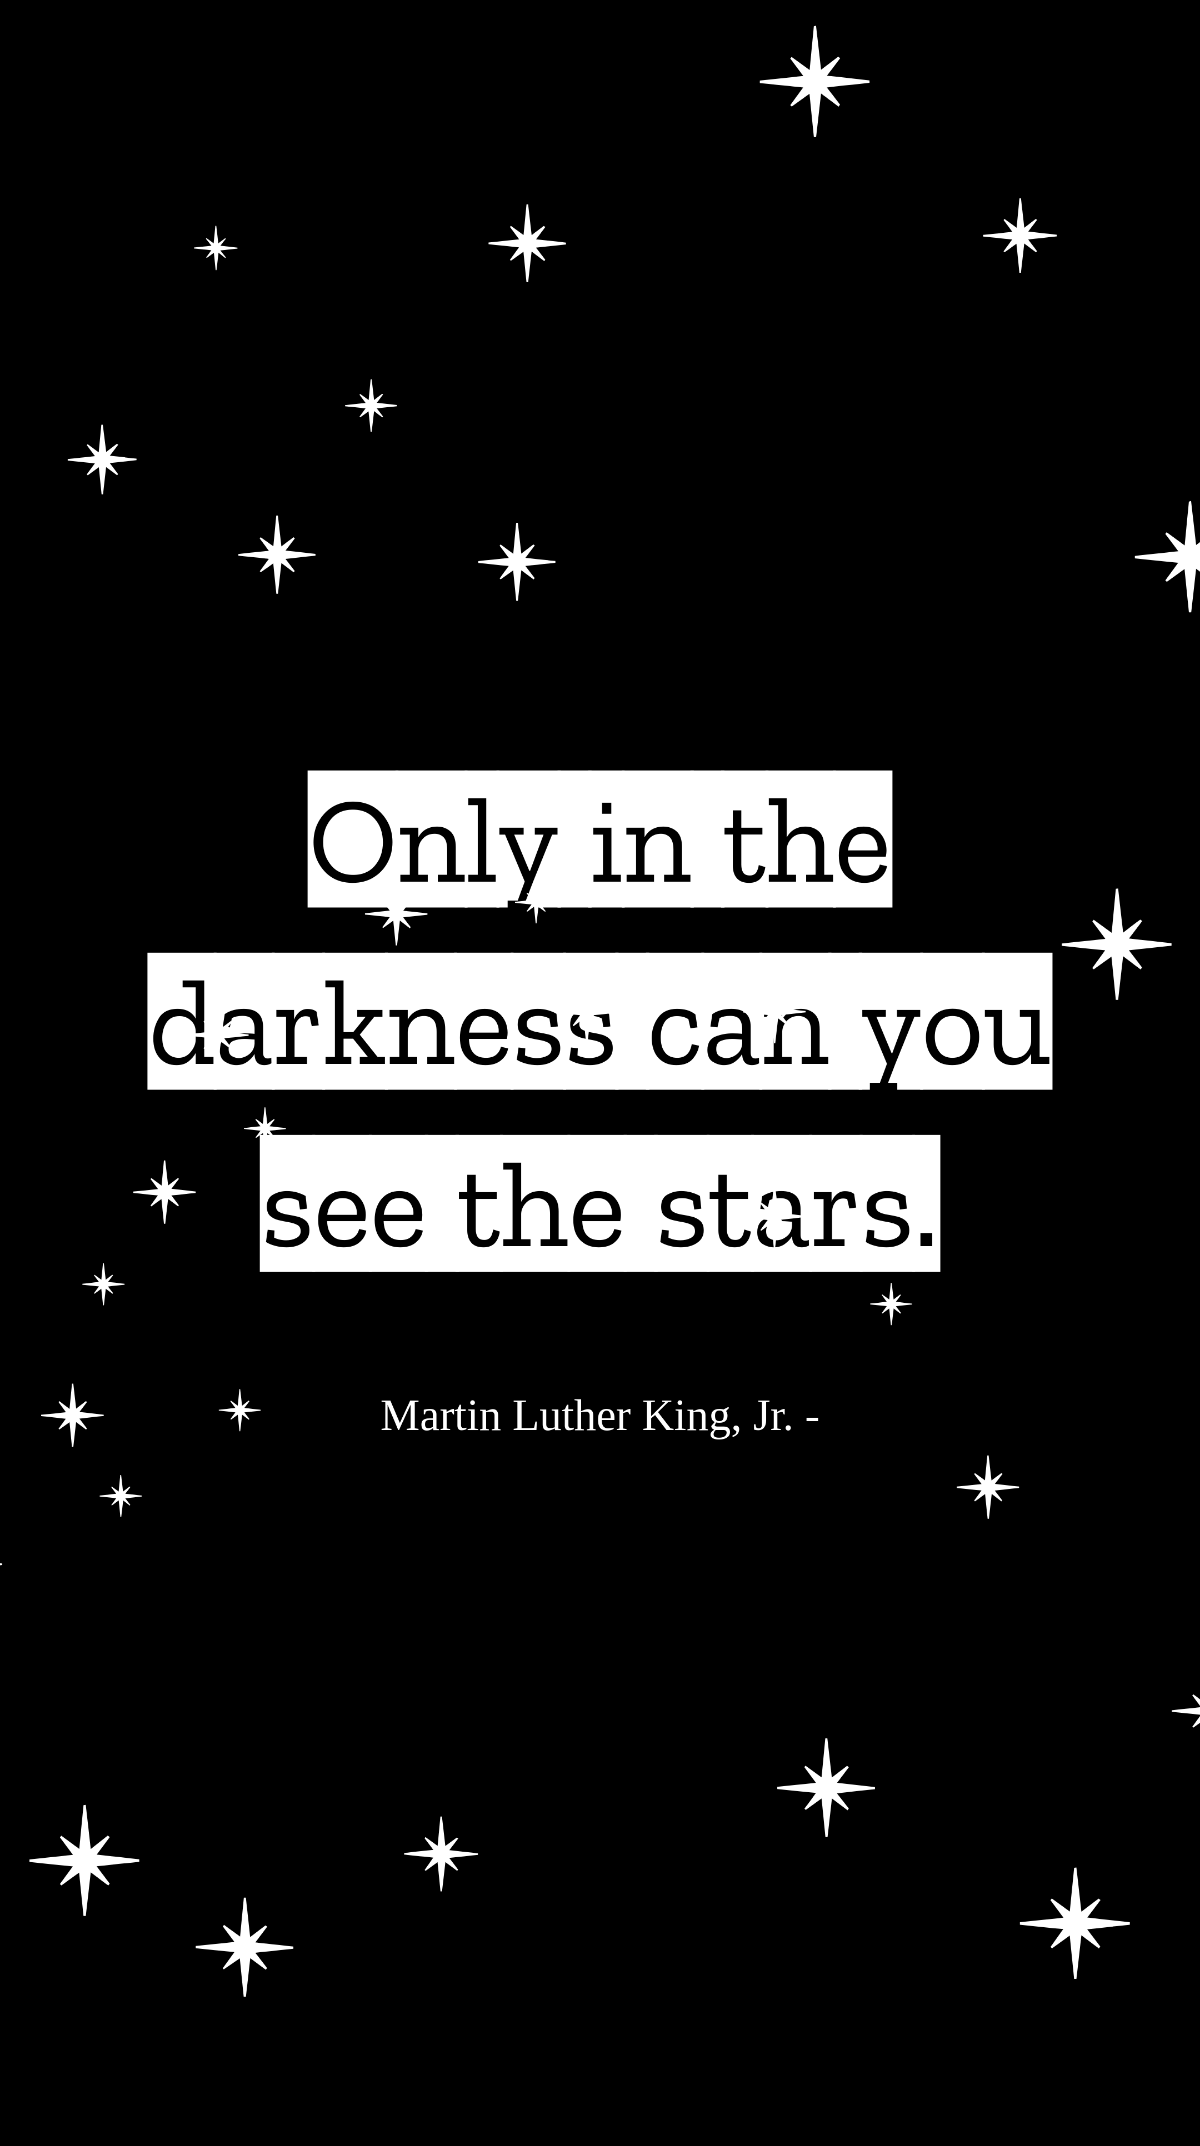 Martin Luther King, Jr. - Only in the darkness can you see the stars. Template